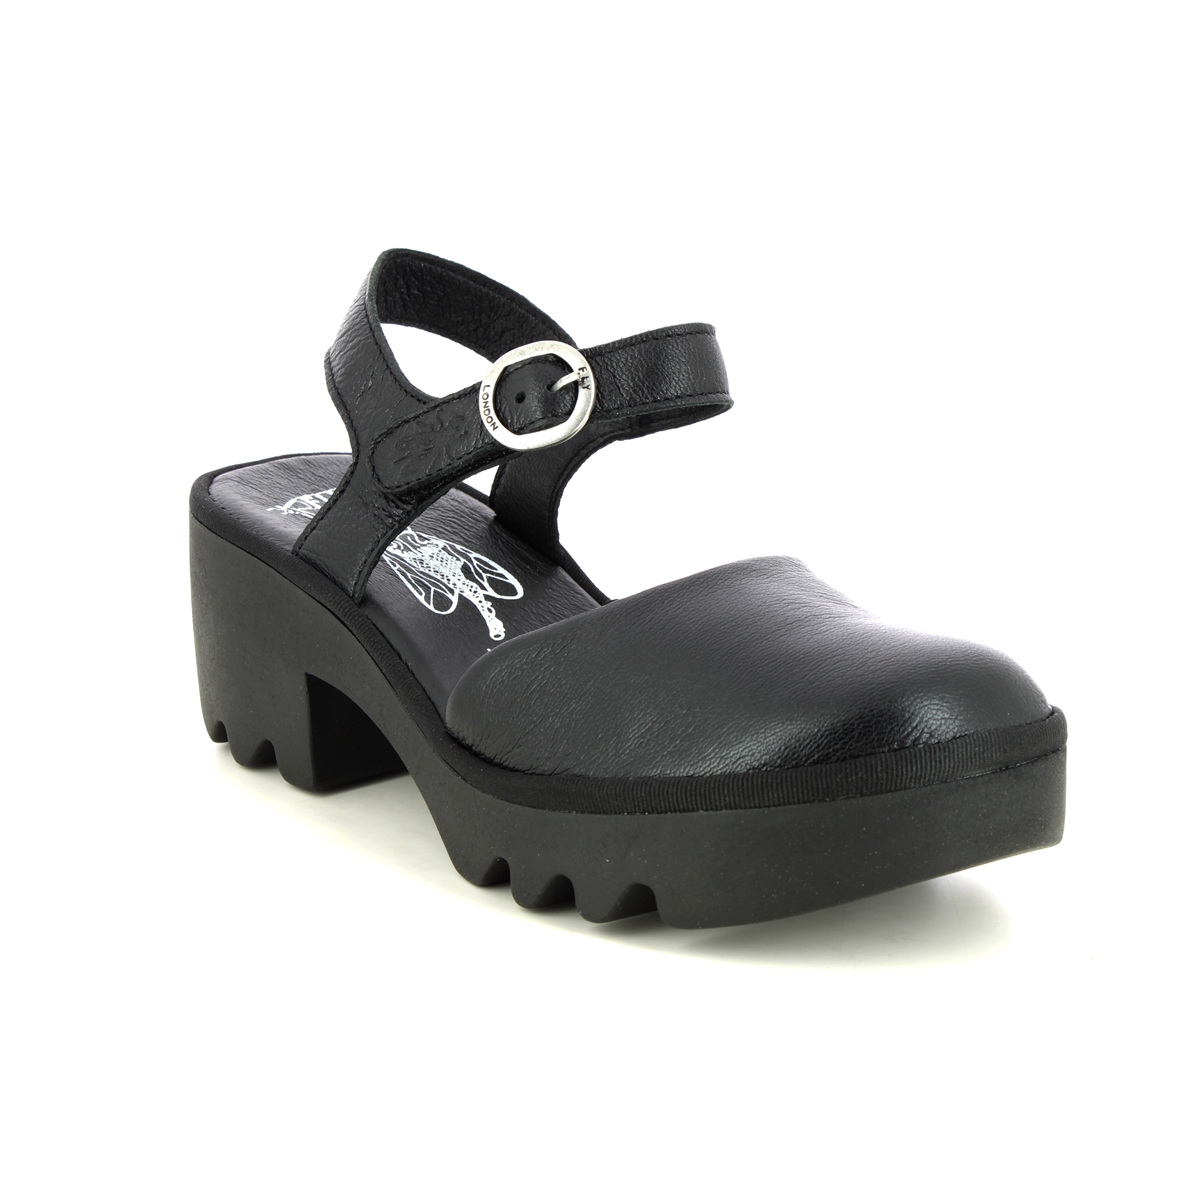 Fly London Tazi Thalia Lsw Black leather Womens Closed Toe Sandals P501498-000 in a Plain Leather in Size 41